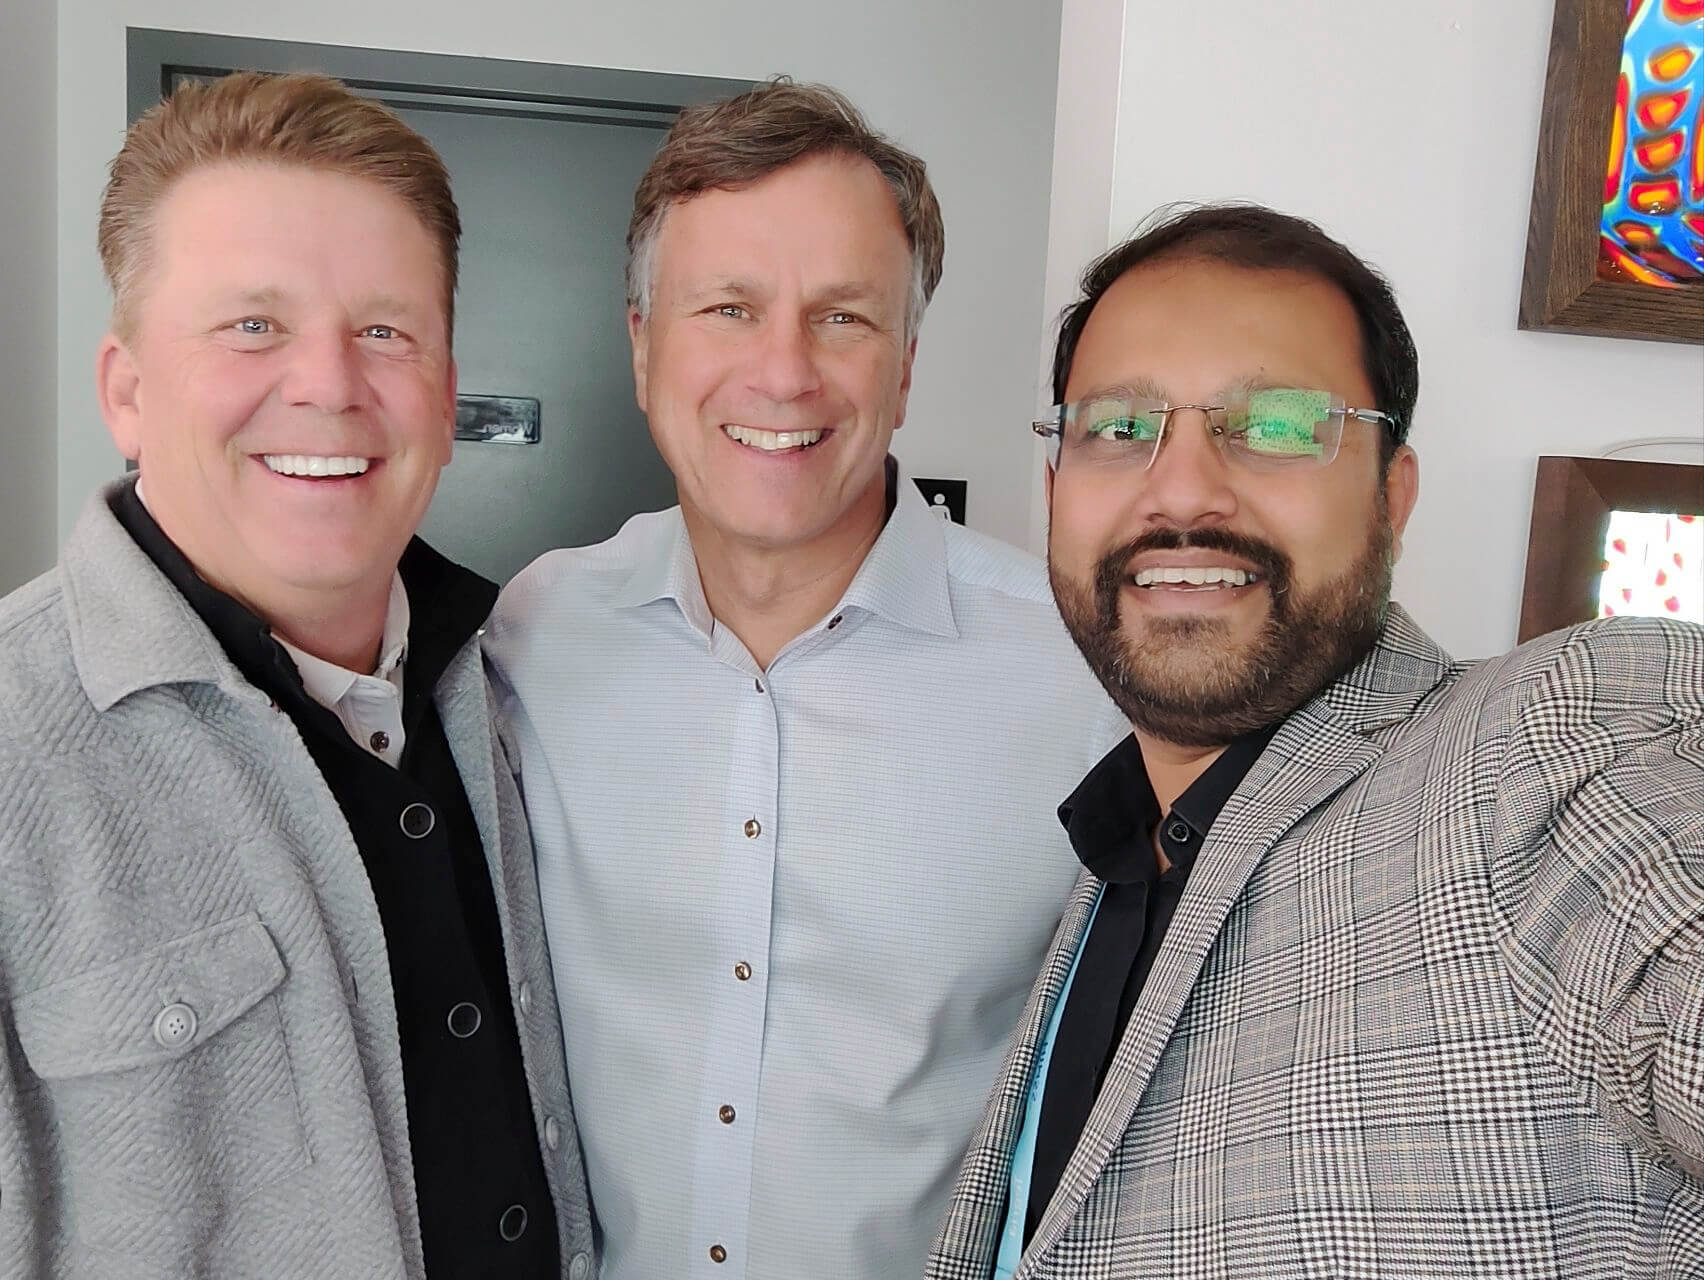 TheHealthcare360 at HIMSS 2023 event in McCormick Place Convention Center, Chicago, IL, USA - #Tejas Deshmukh, #clair360 #HIMSS2023 #Glen Tullman #Kelly Keegan